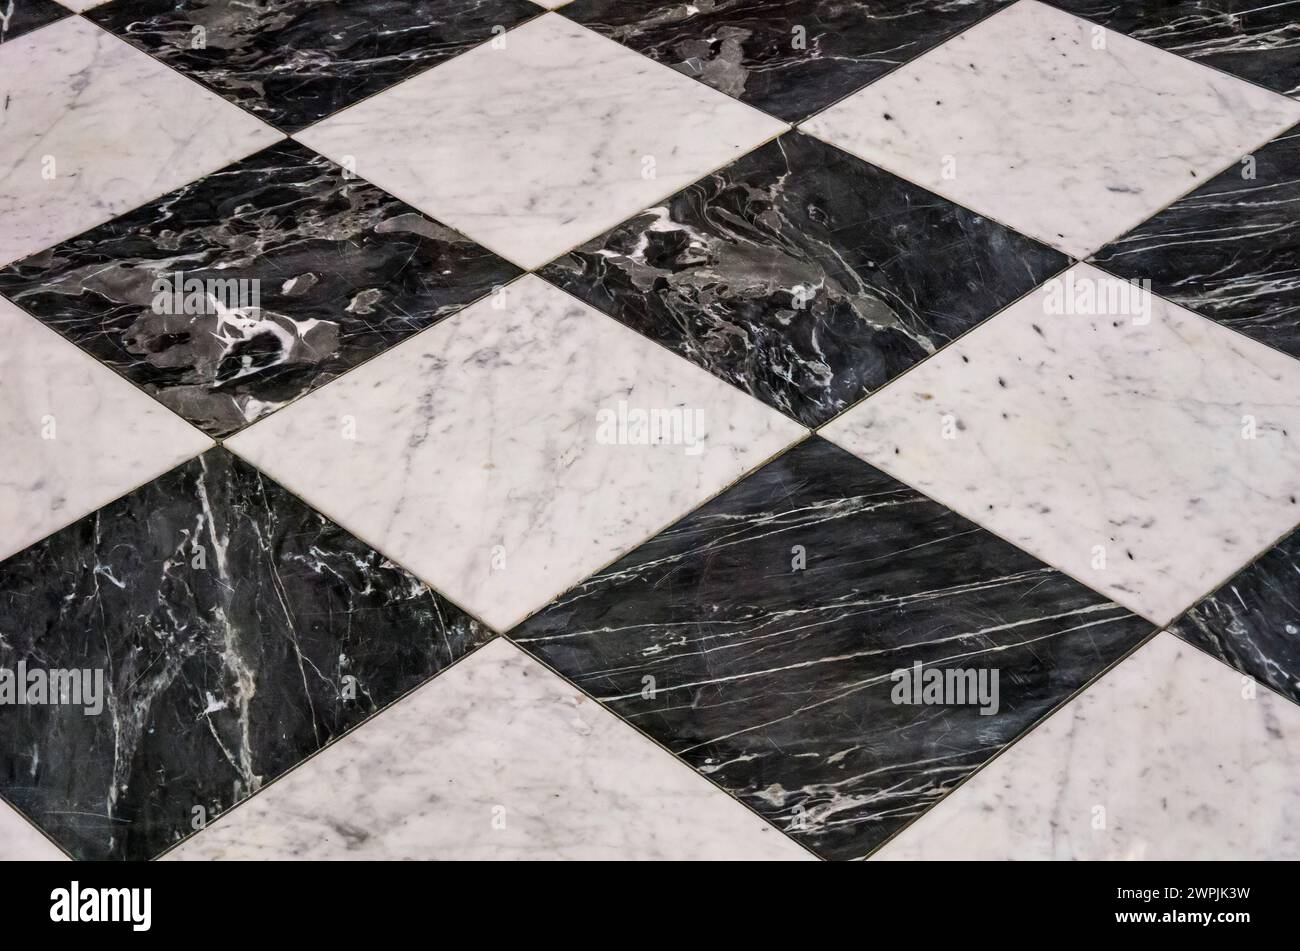 Checkerboard pattern on a stone floor. Stock Photo